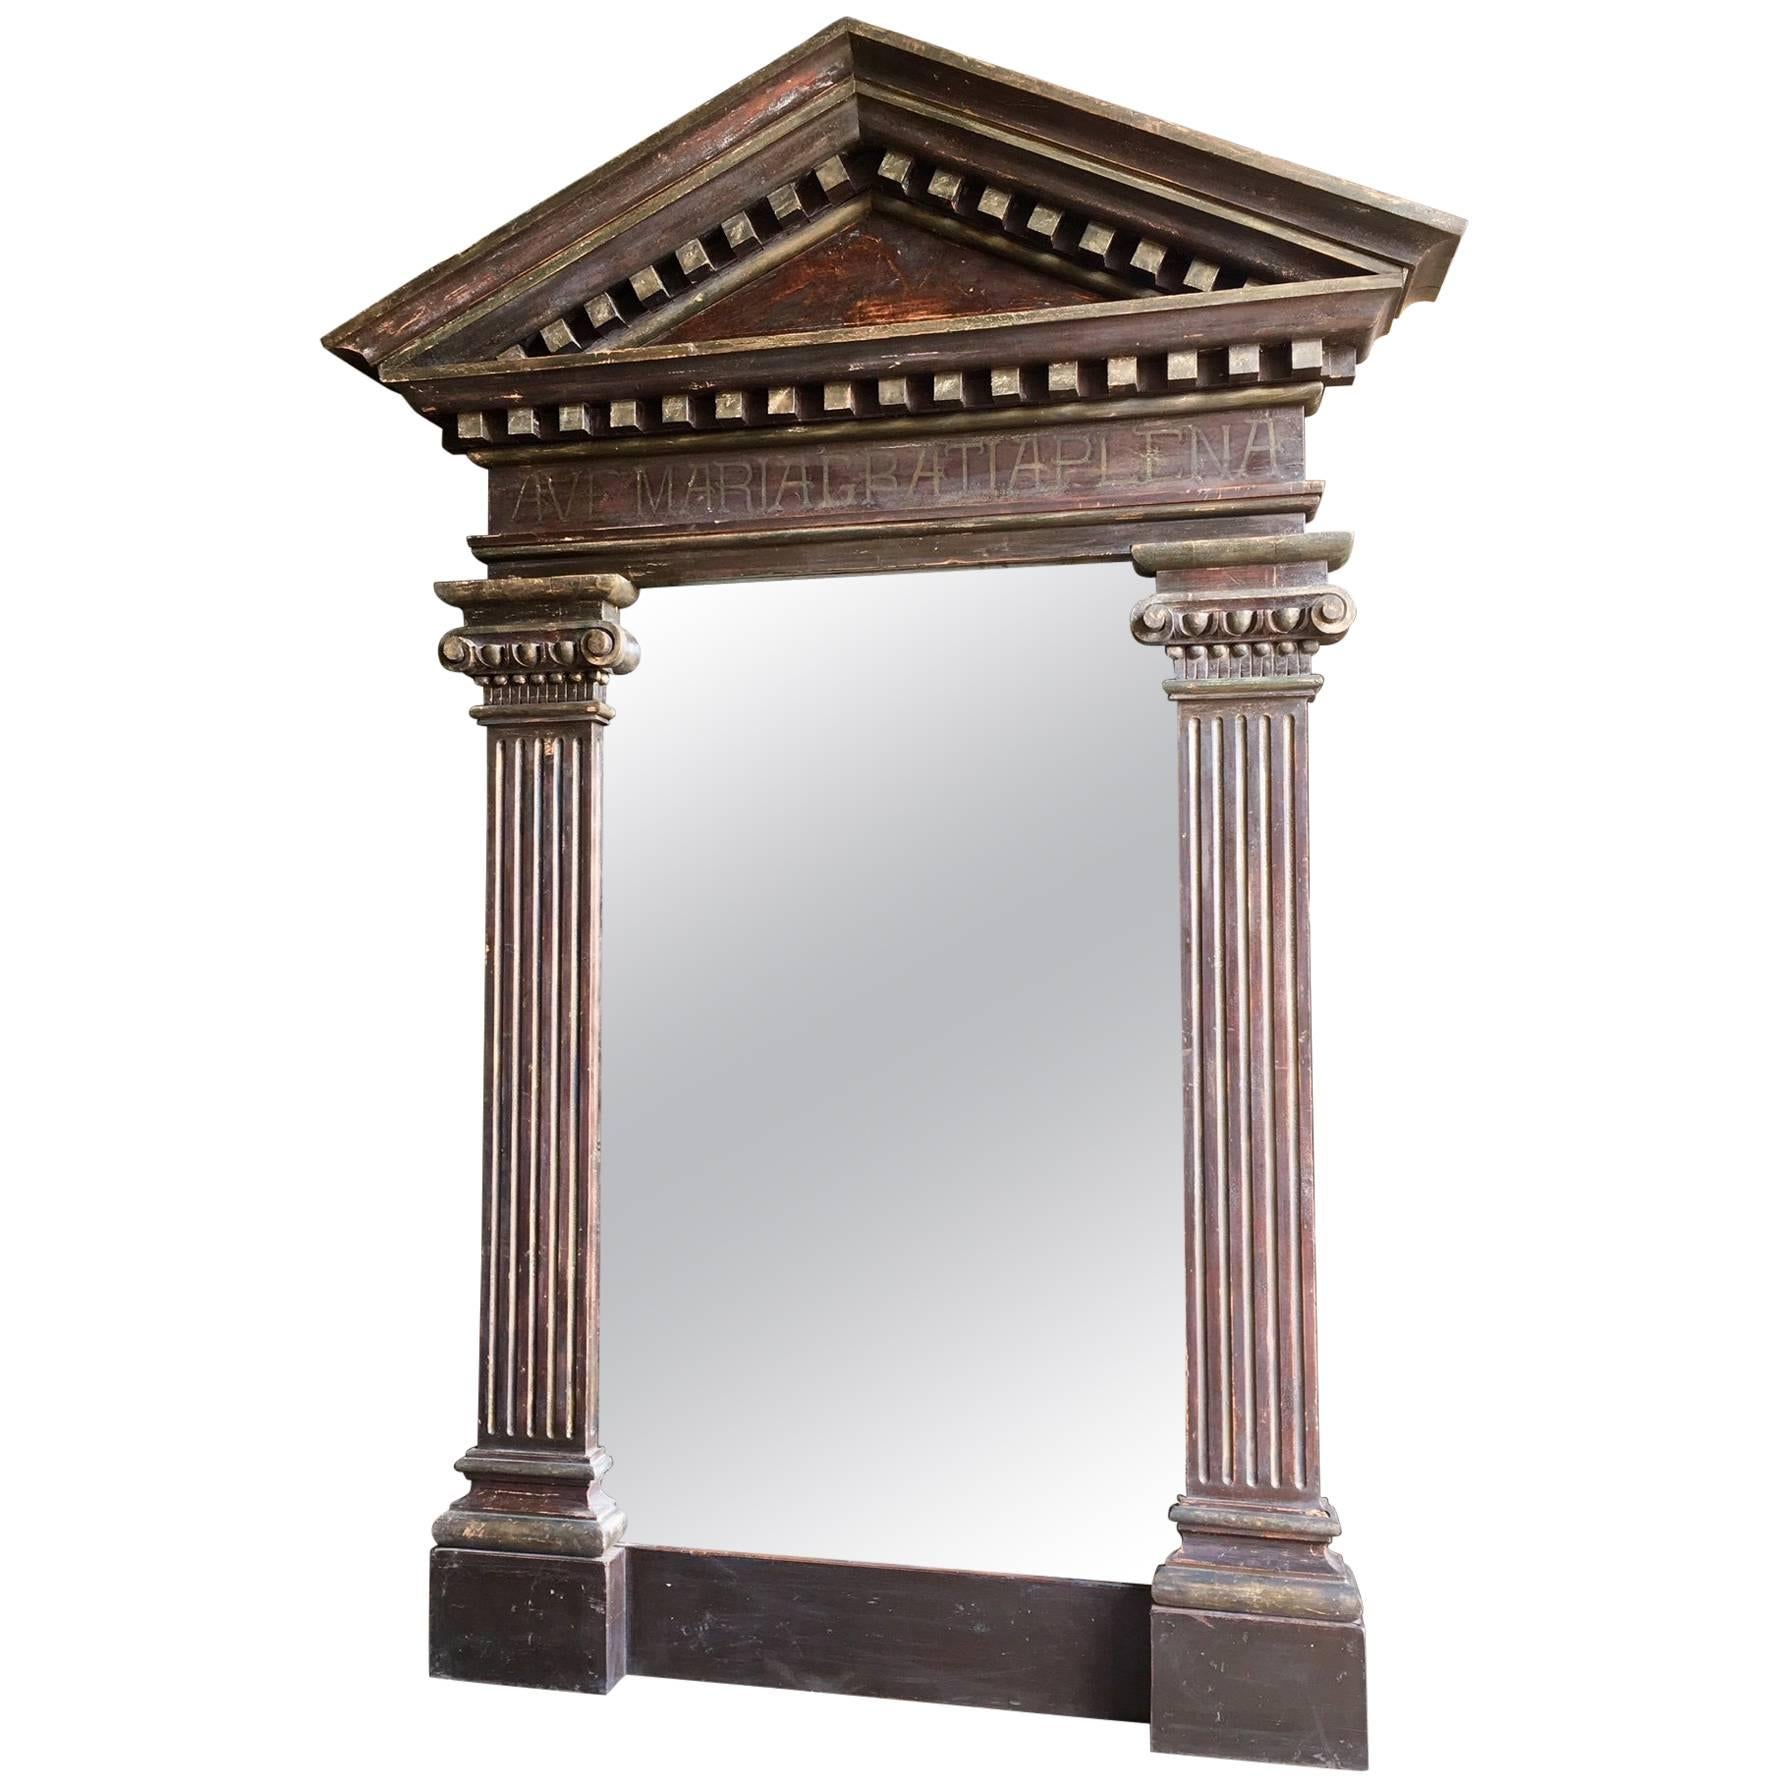 Very Large Mirror in Antique Decorative Architectural Frame